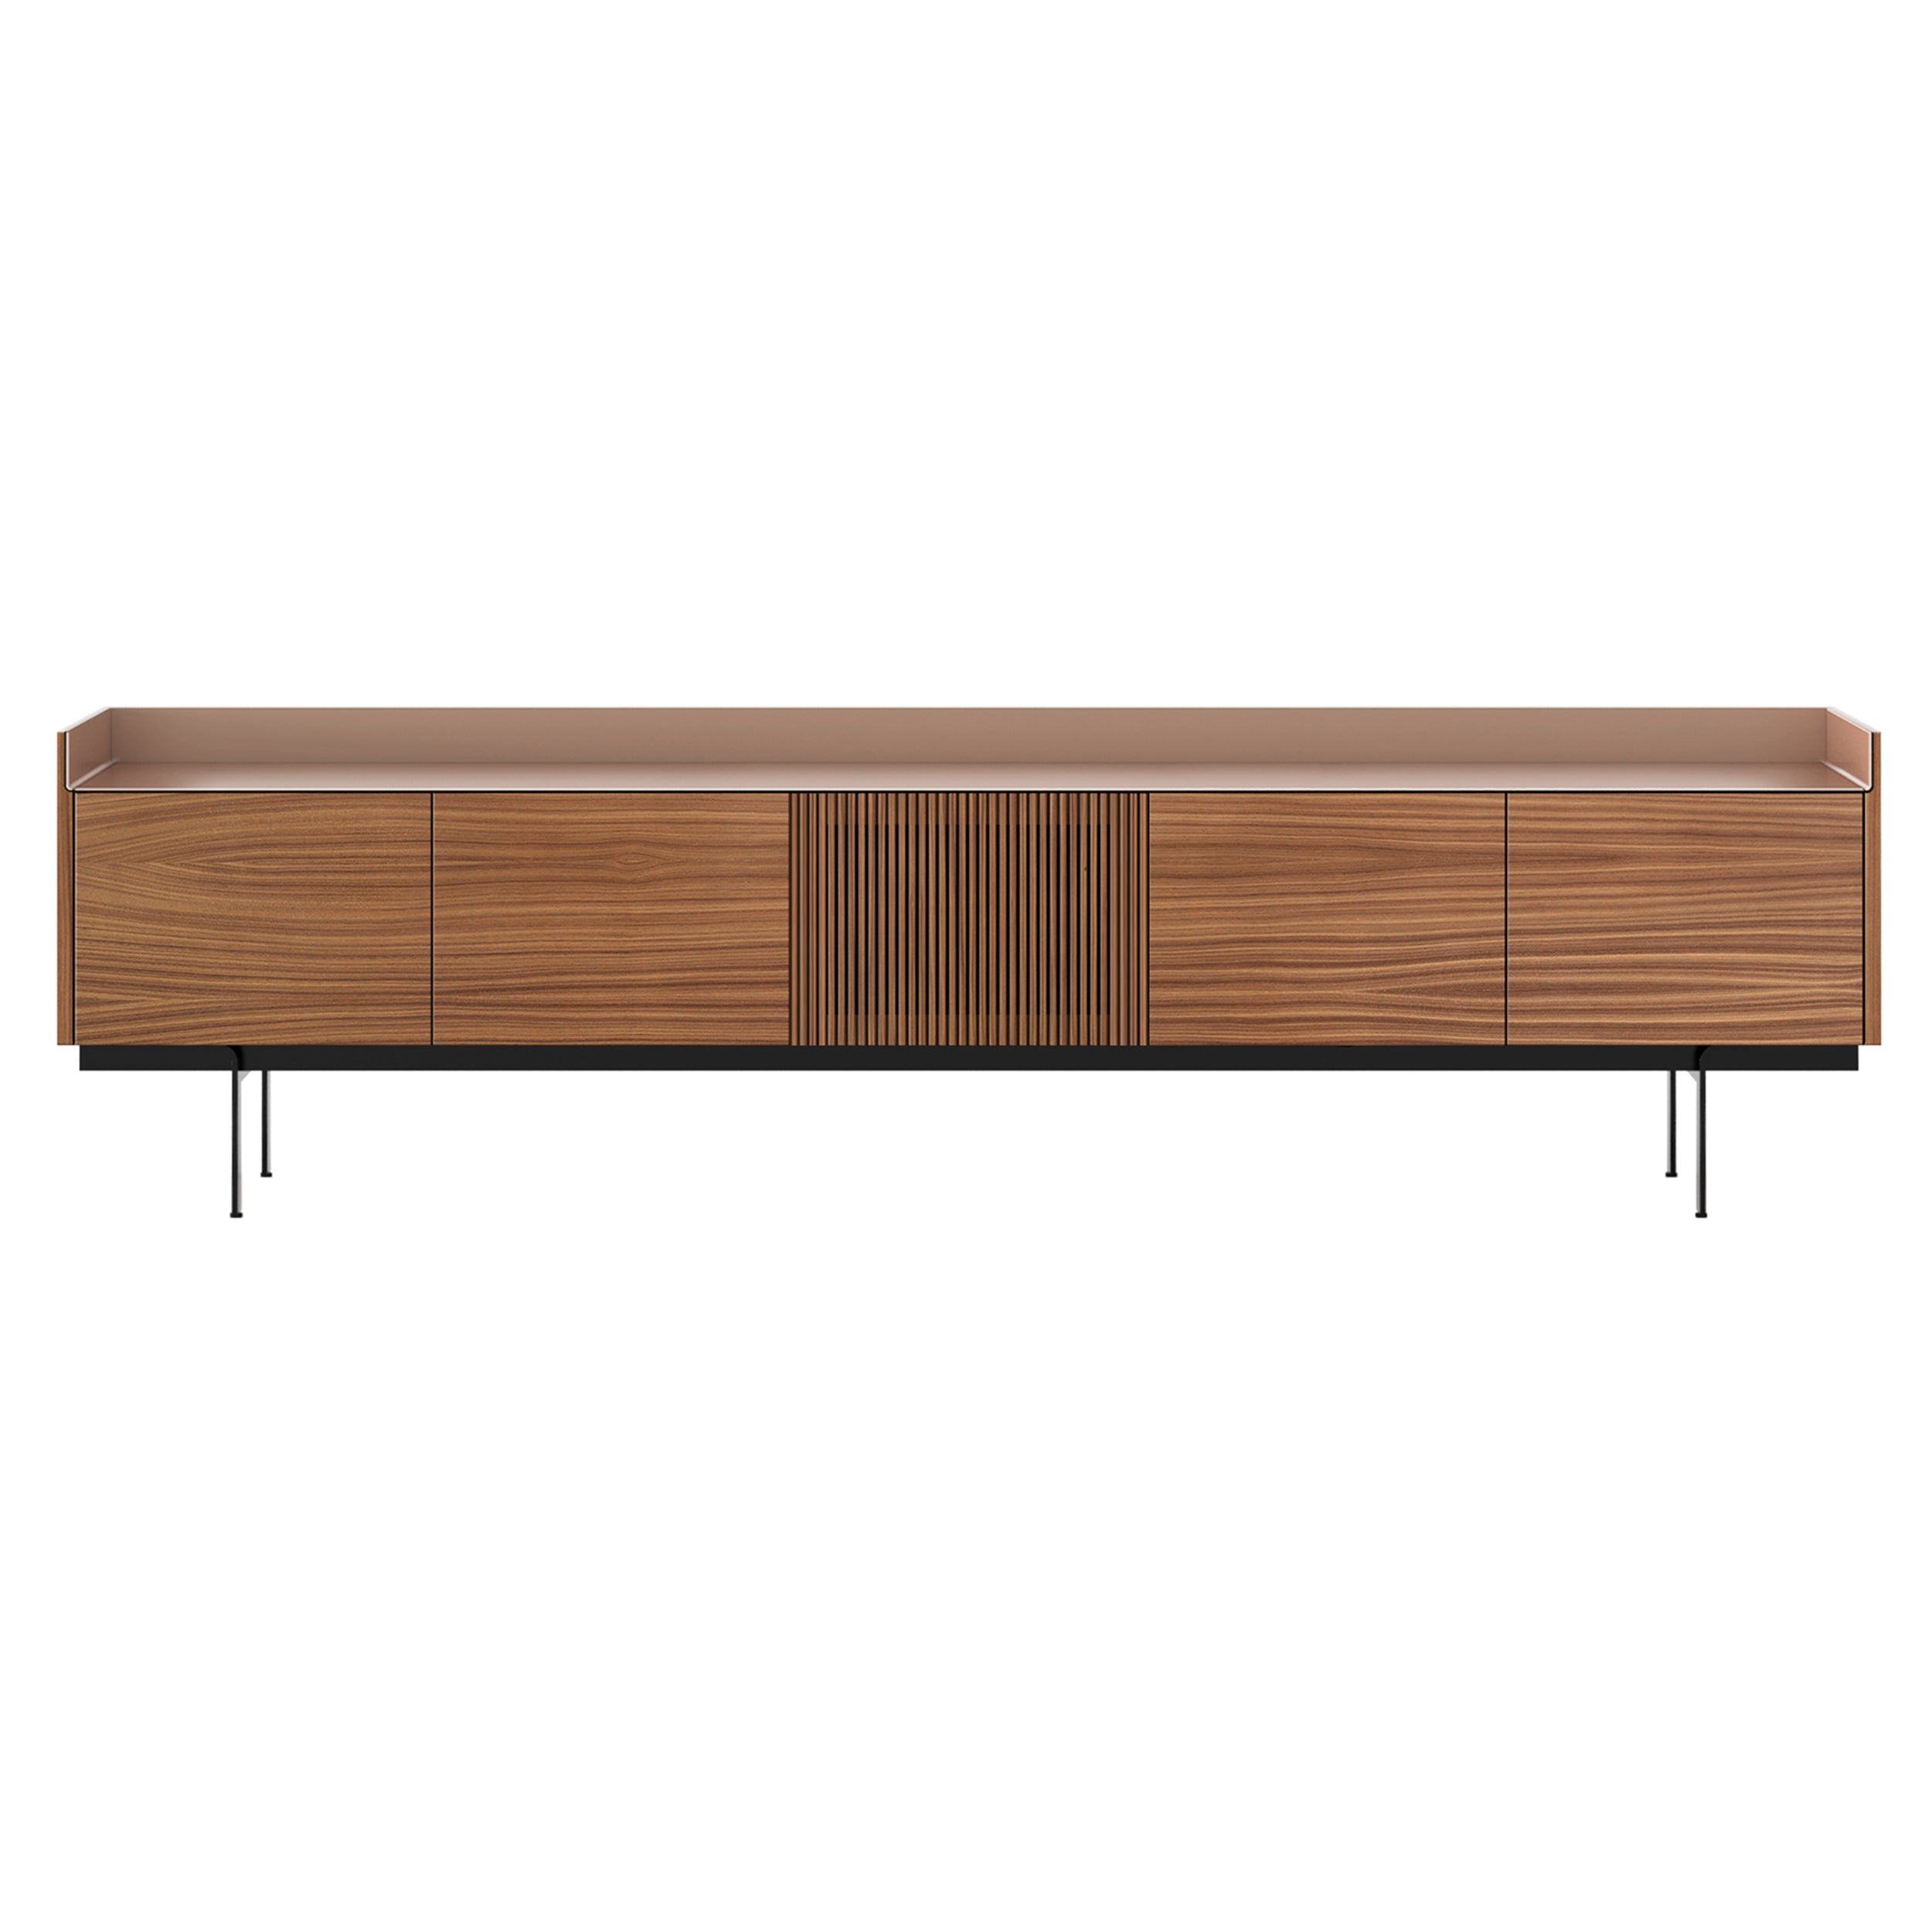 Stockholm Technic Sideboard: STH506 + Walnut Stained Walnut + Anodized Aluminum Pale Rose + Black